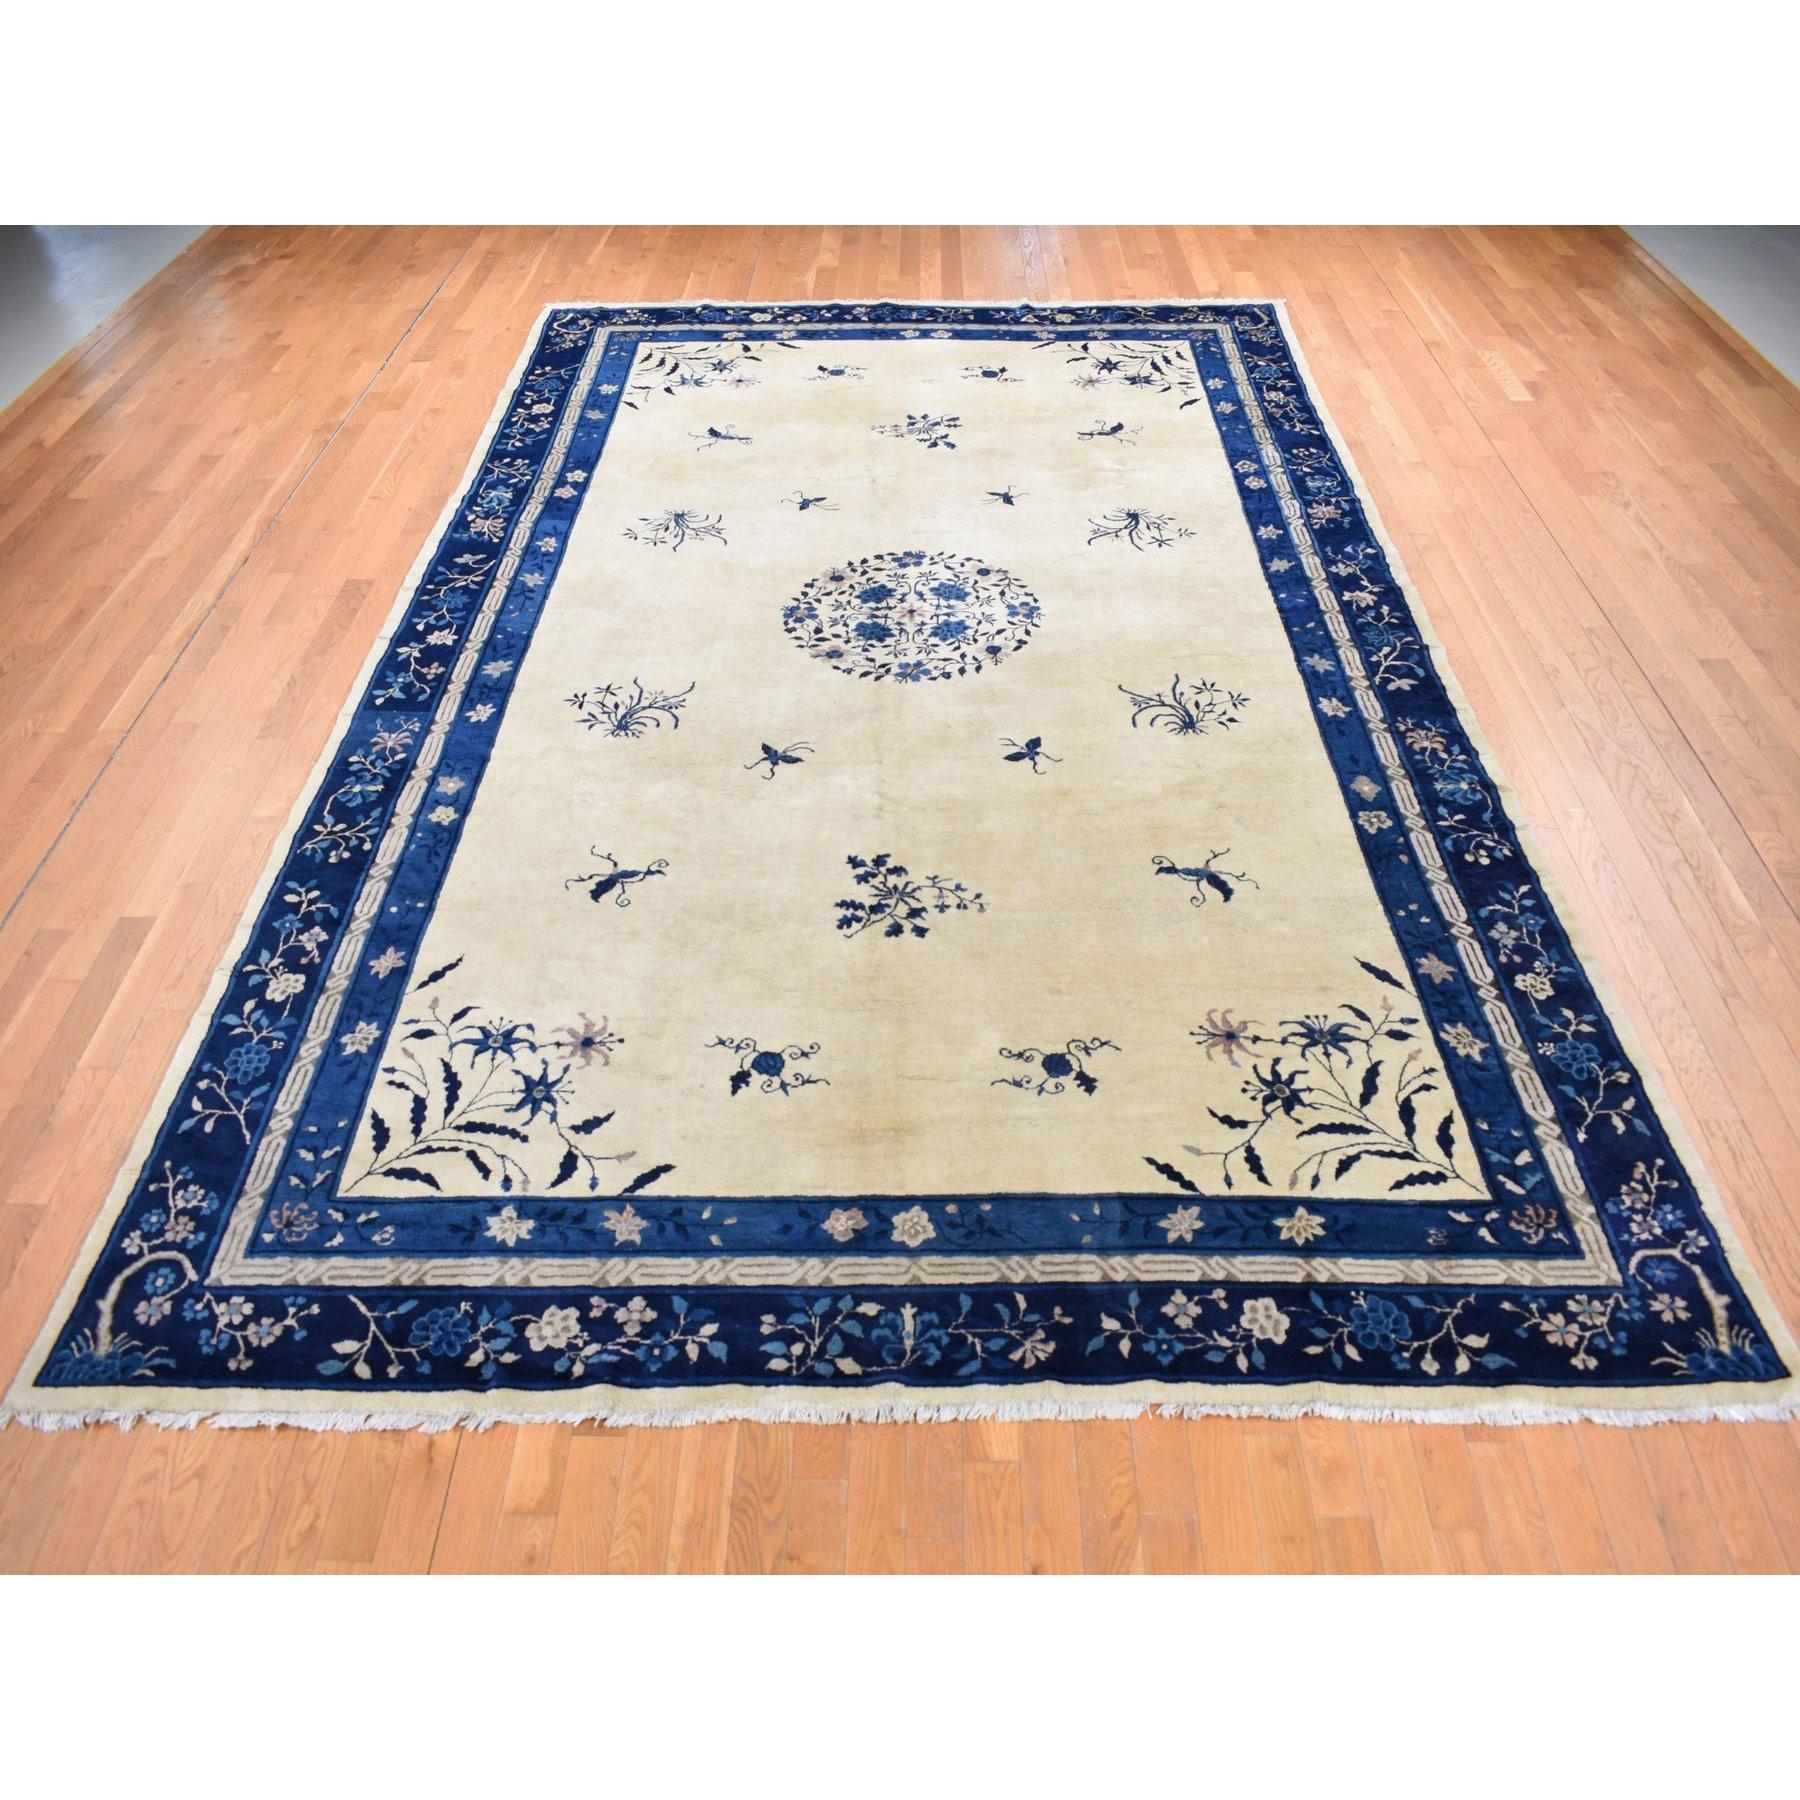 This fabulous Hand-Knotted carpet has been created and designed for extra strength and durability. This rug has been handcrafted for weeks in the traditional method that is used to make
Exact Rug Size in Feet and Inches : 9'0